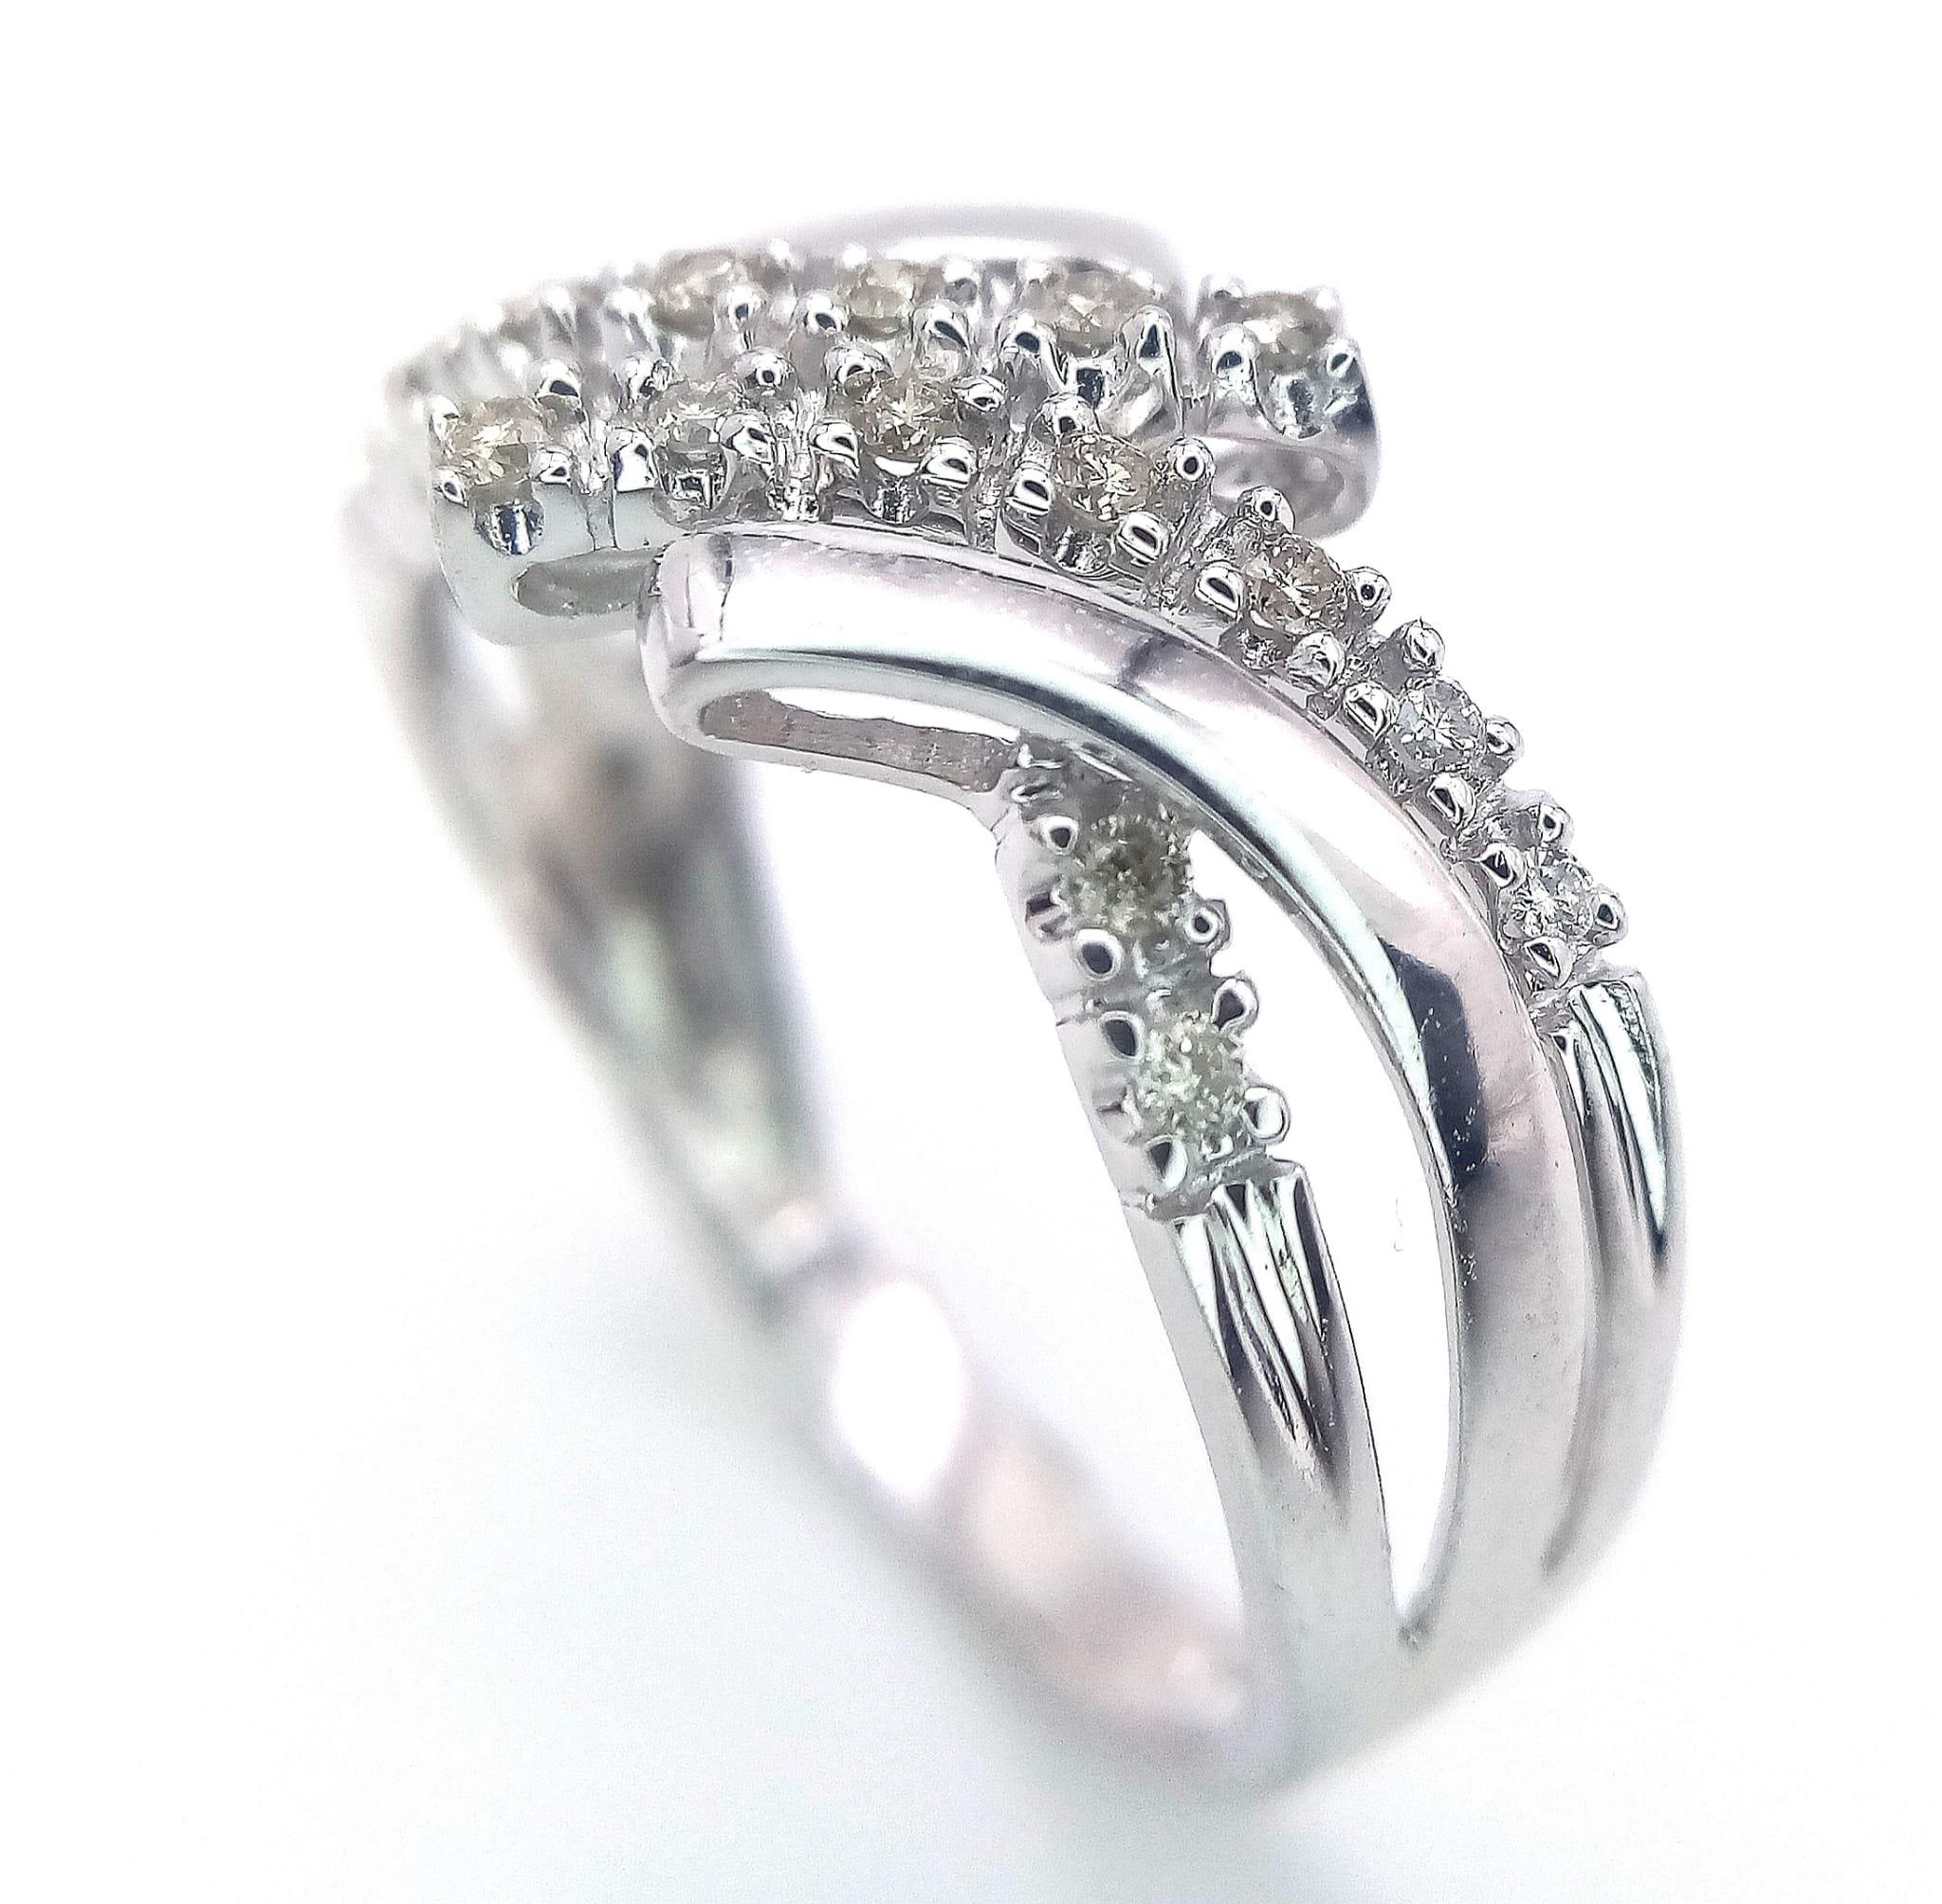 A FANCY 9K WHITE GOLD DIAMOND CROSSOVER RING, APPROX 0.15CT DIAMONDS, WEIGHT 2.6G SIZE Q - Image 4 of 12